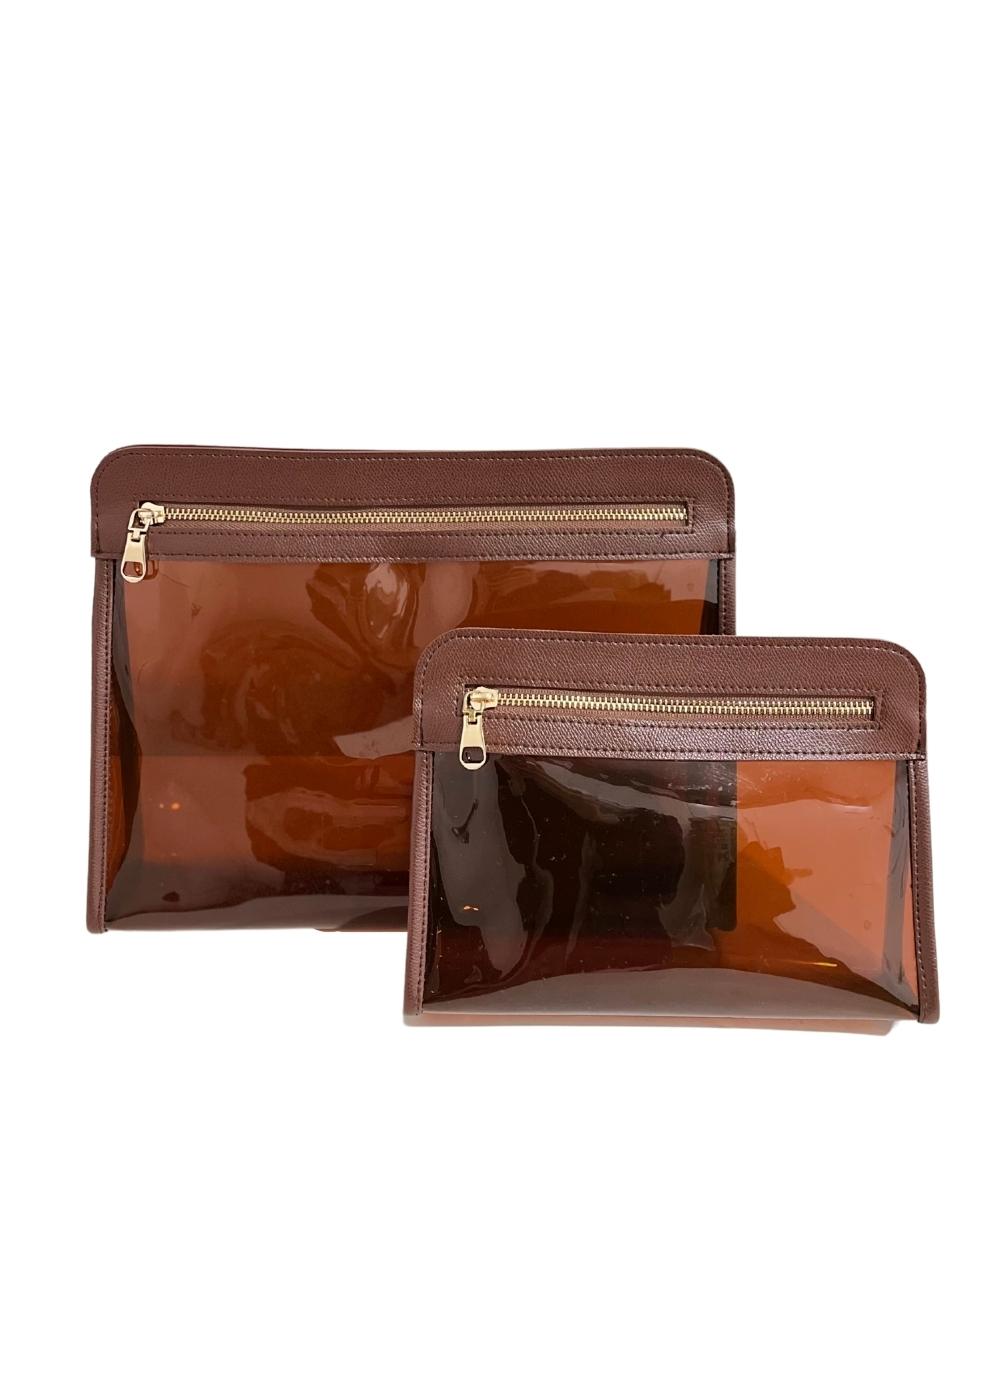 Clarity Pouch (Large)